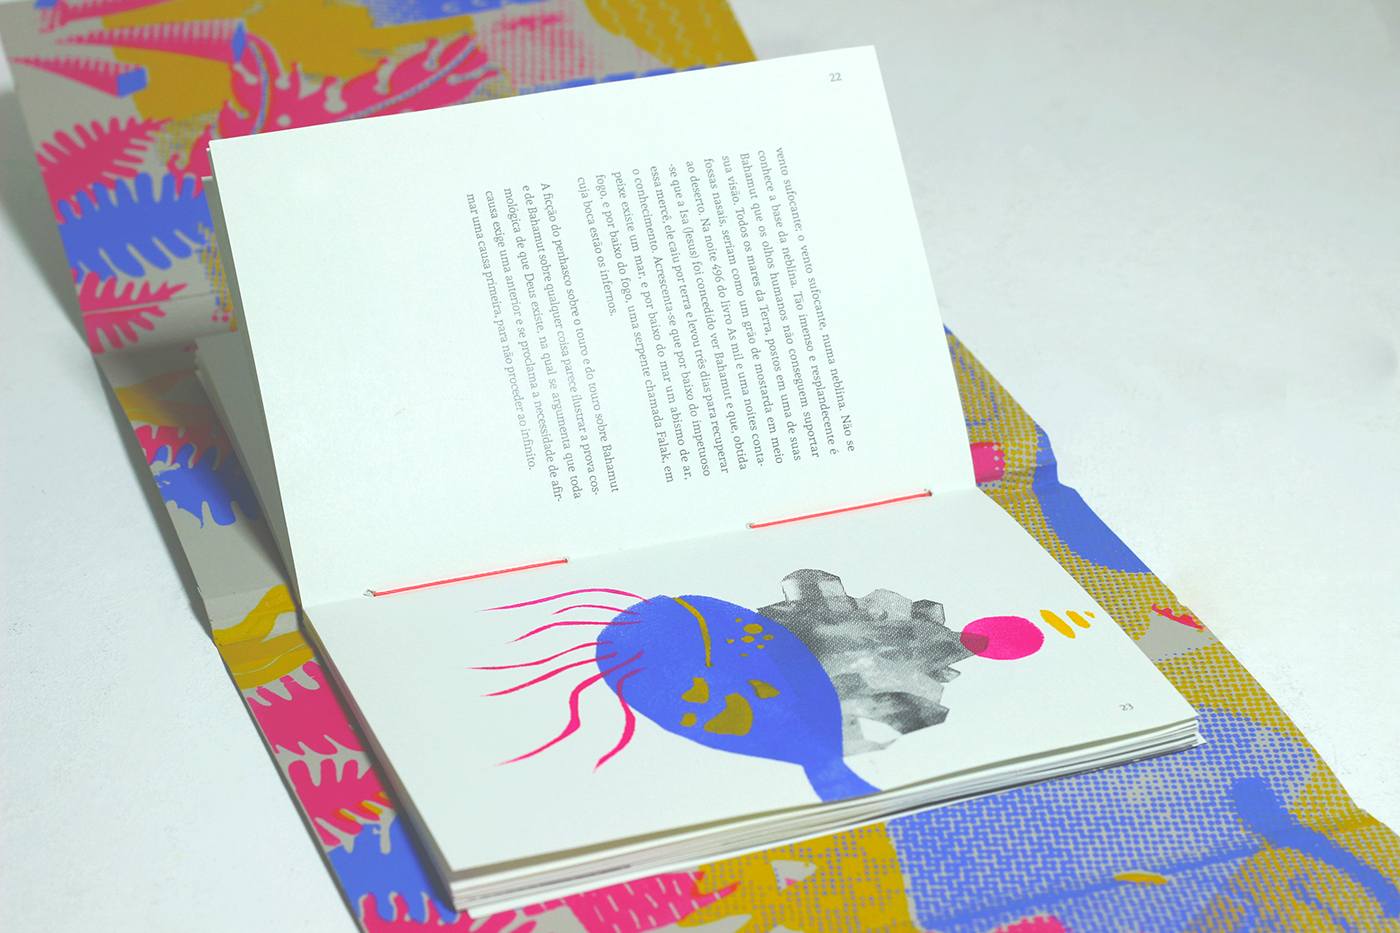 editorial book ilustration fiction literature graphic Serigraphy